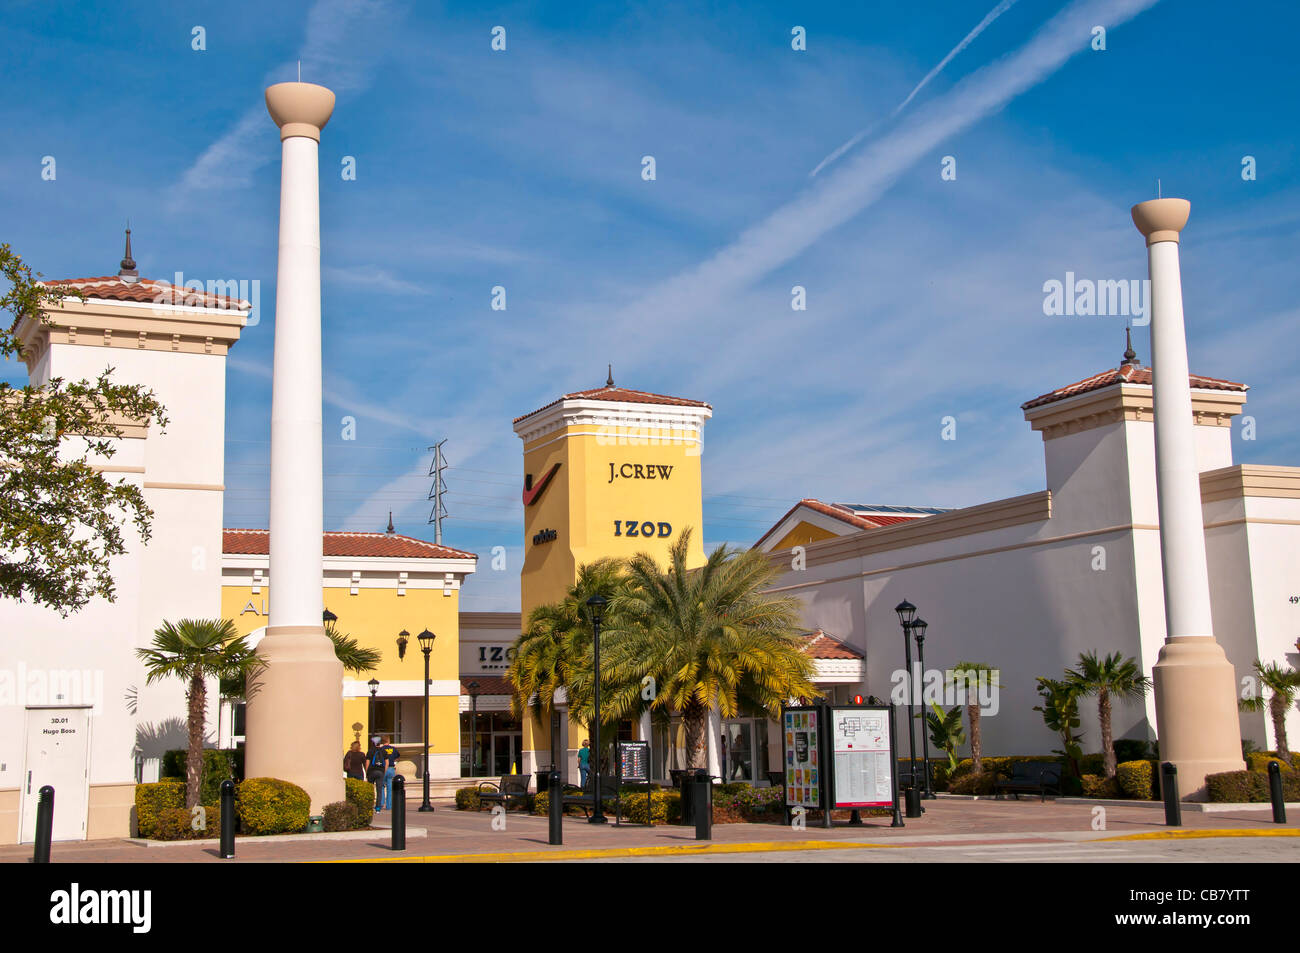 Premium Outlet shopping mall with J Crew and Izod store signs on International  Drive, Orlando Florida Stock Photo - Alamy